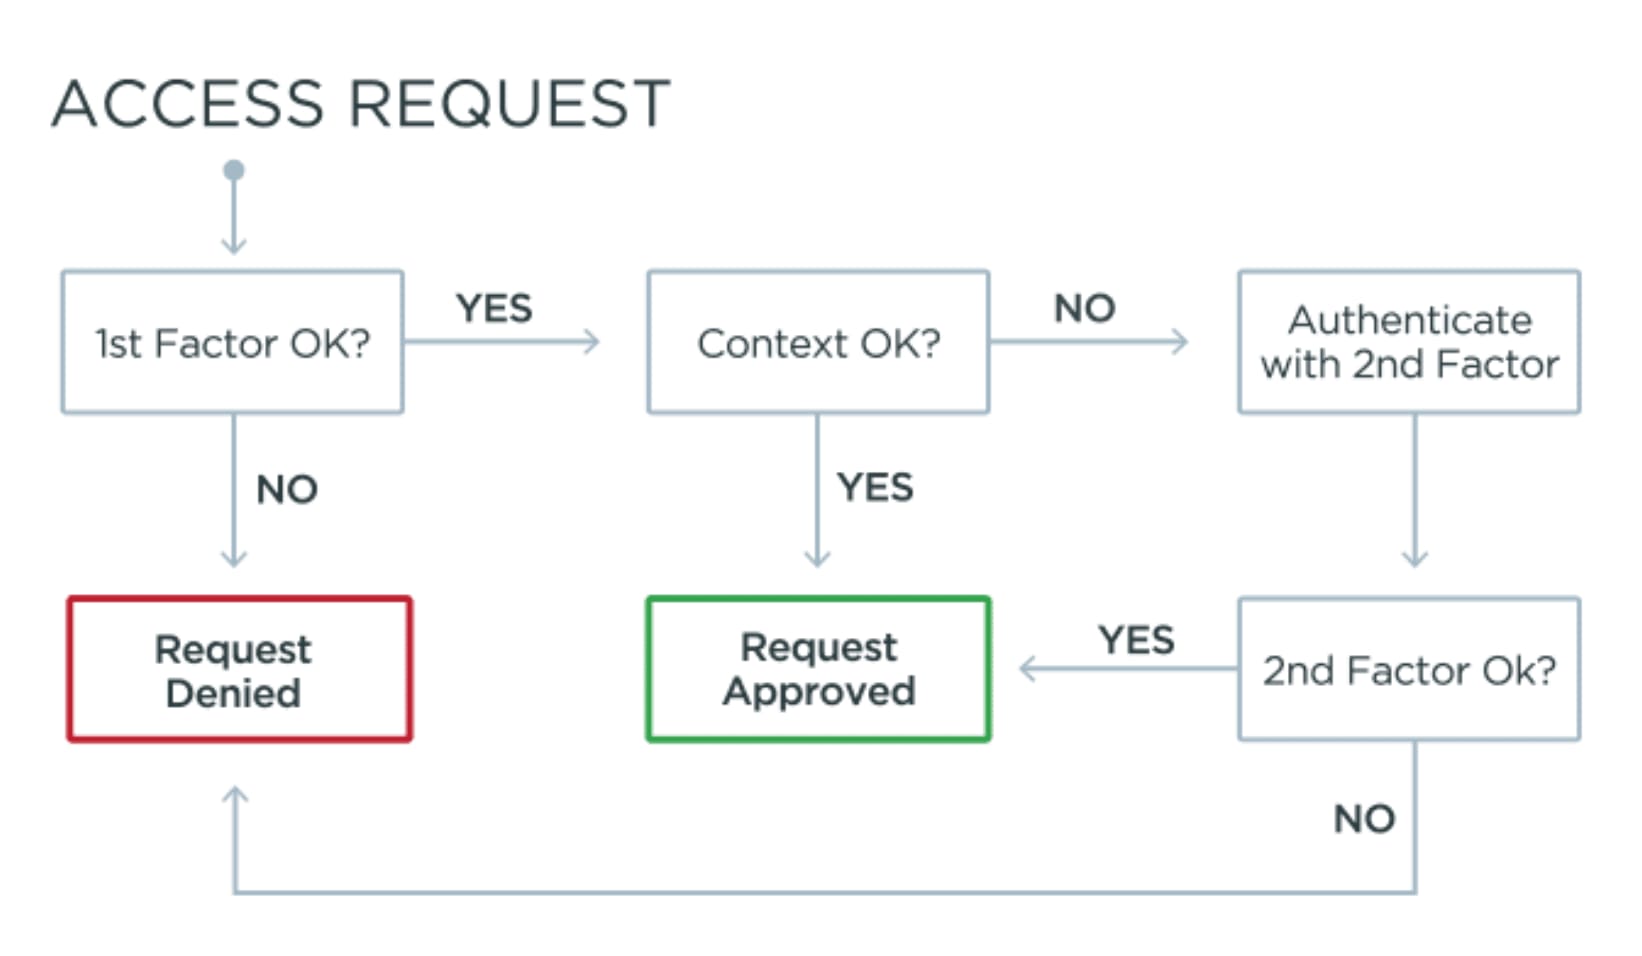 Decision tree showing how access requests work with MFA from request to either approval or denial.